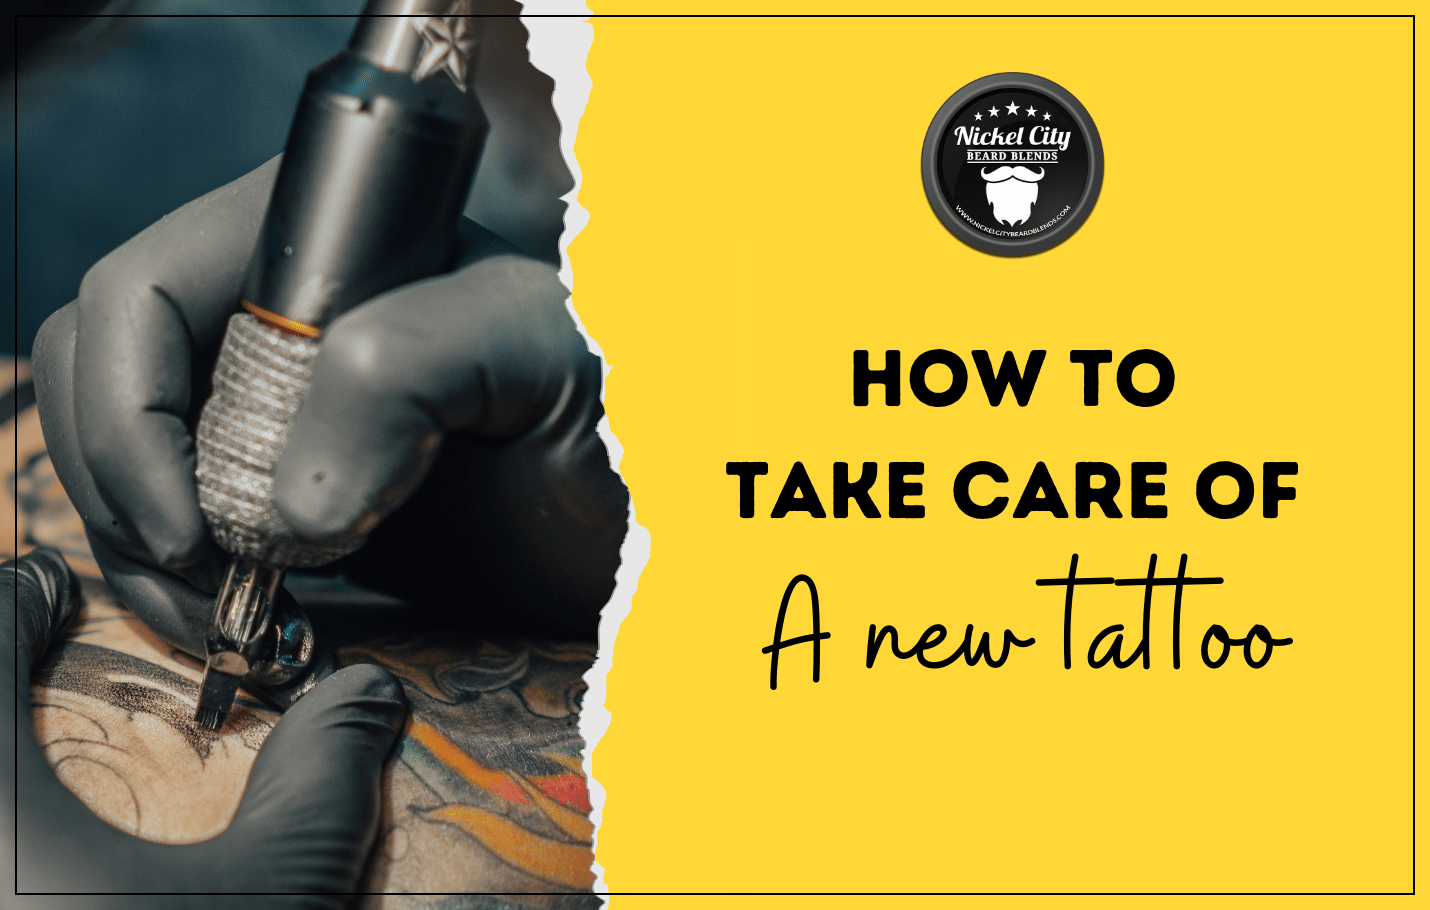 Tattoo Aftercare: 8 Tips for Taking Care of a New Tattoo